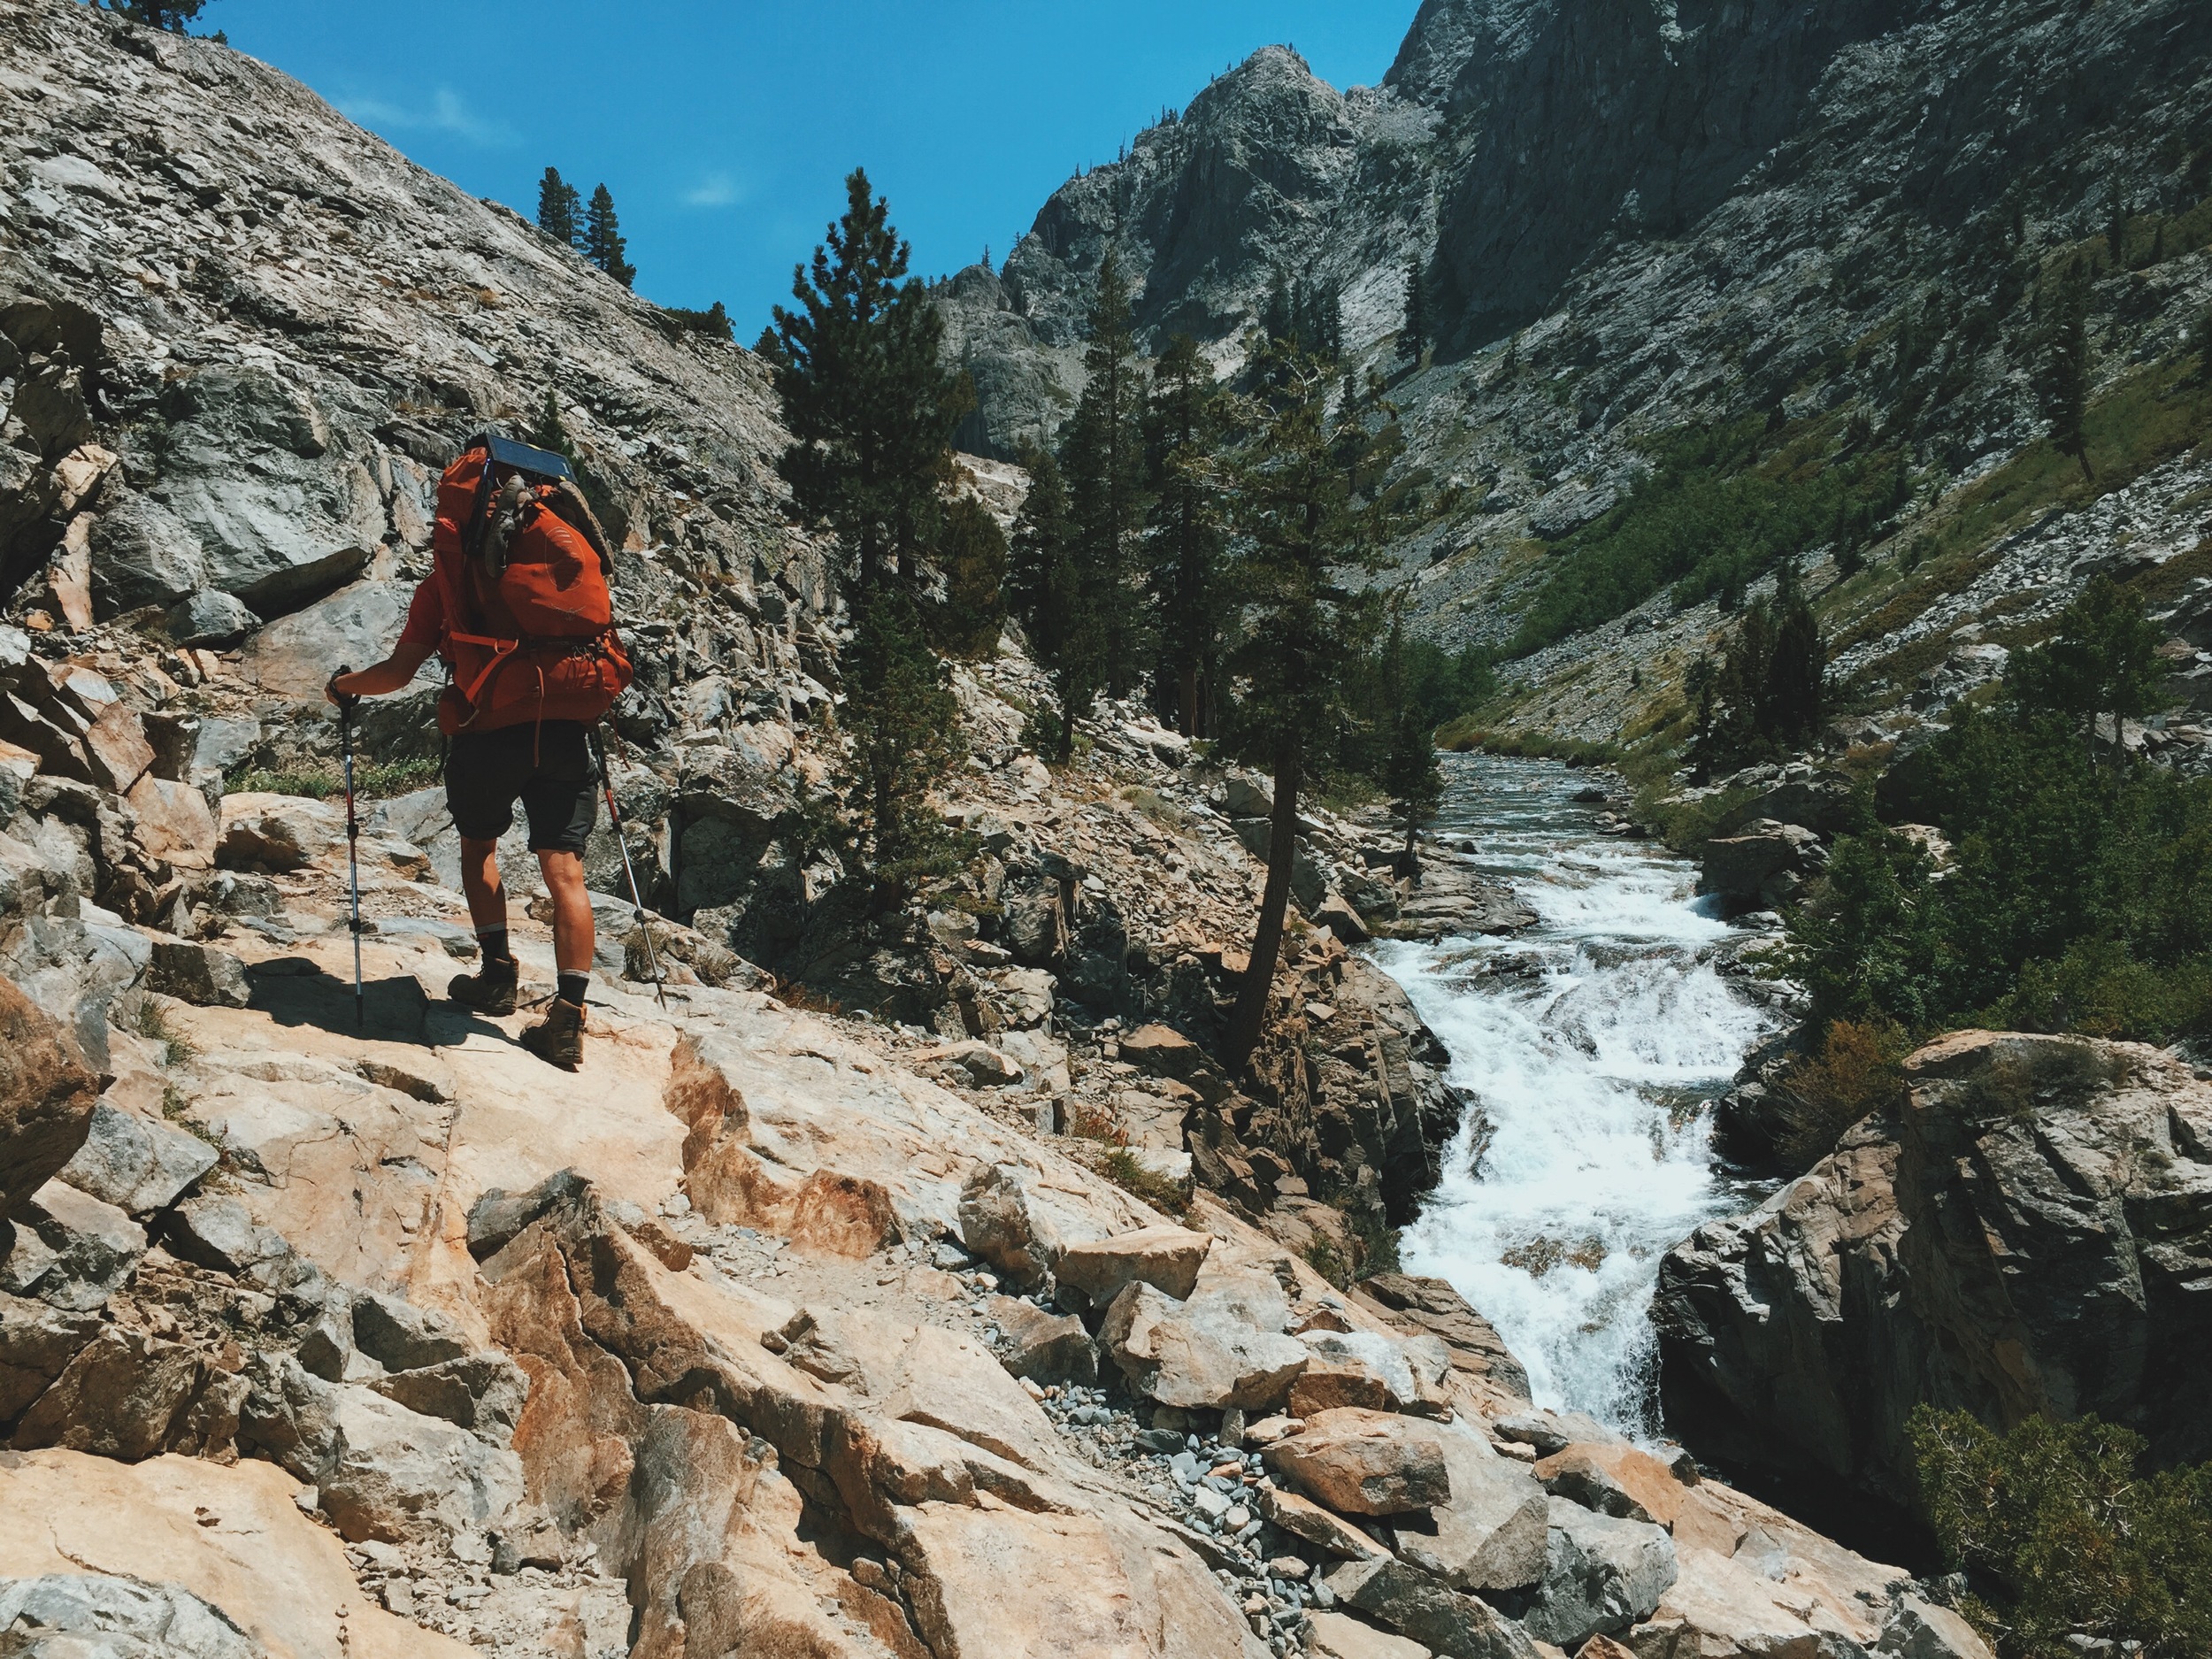  Hiking along the South Fork of the San Joaquin shortly after entering Kings Canyon National Park 